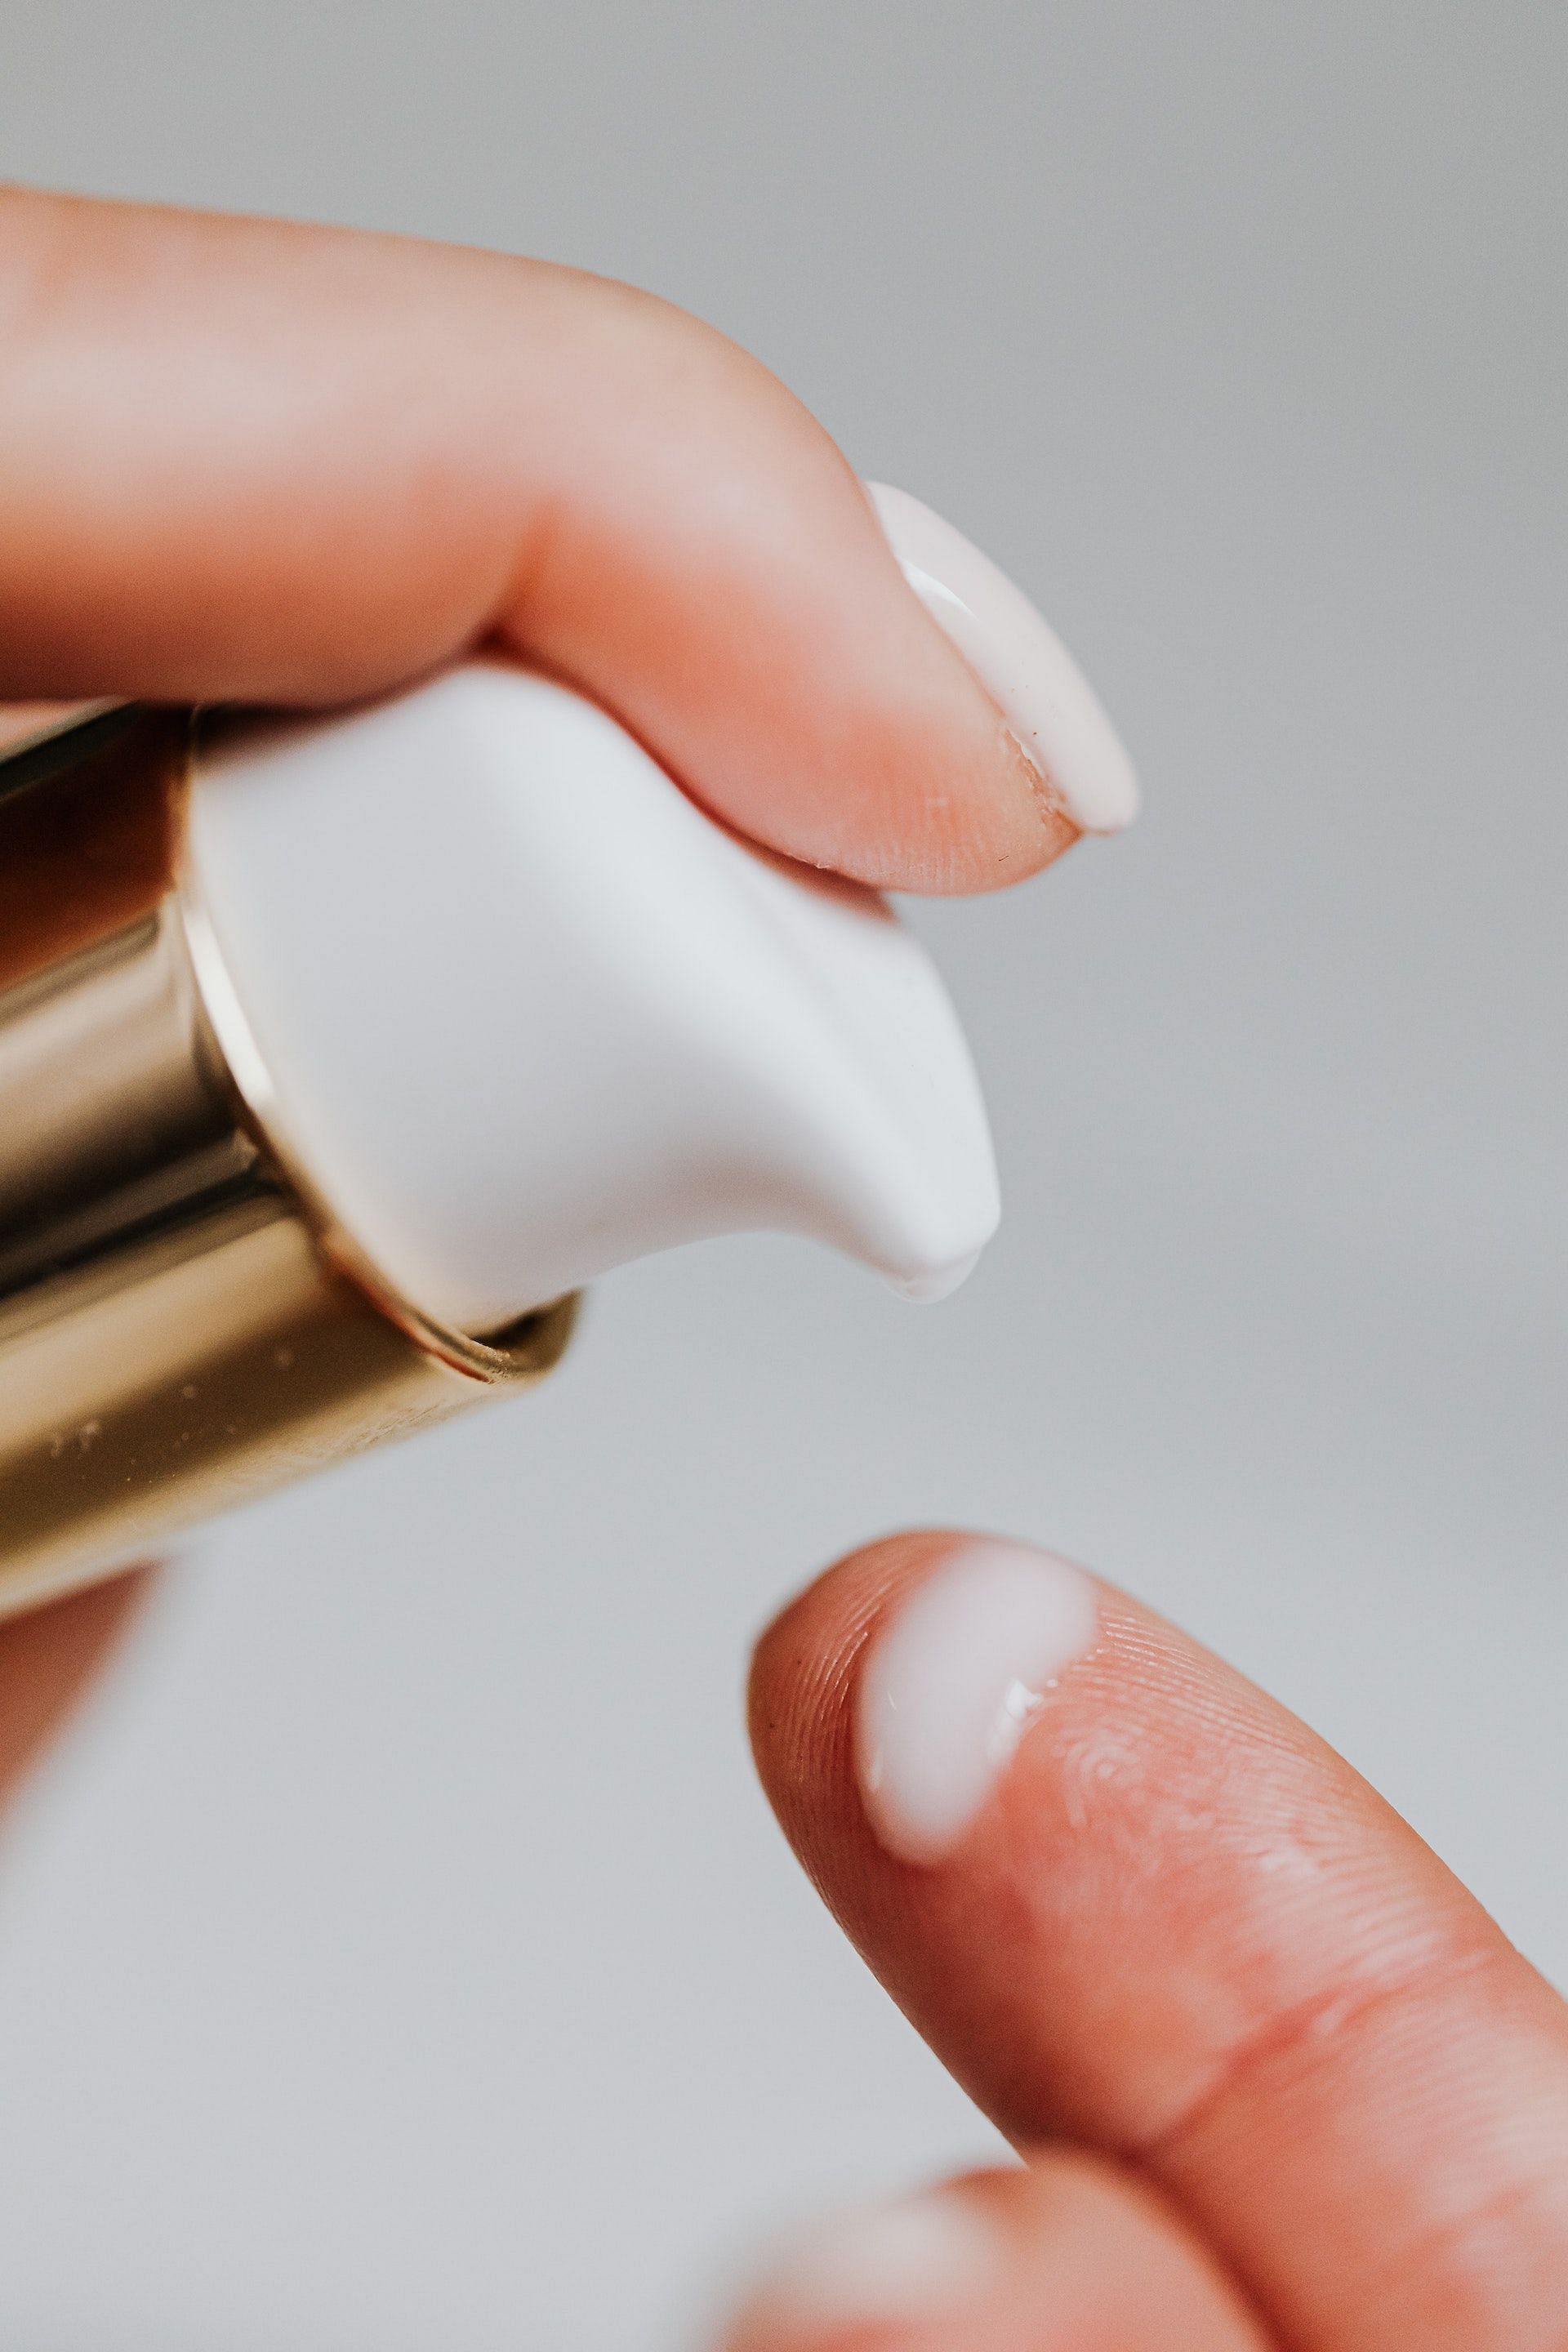 Lotion for that extra hydration (Image via Pexels)